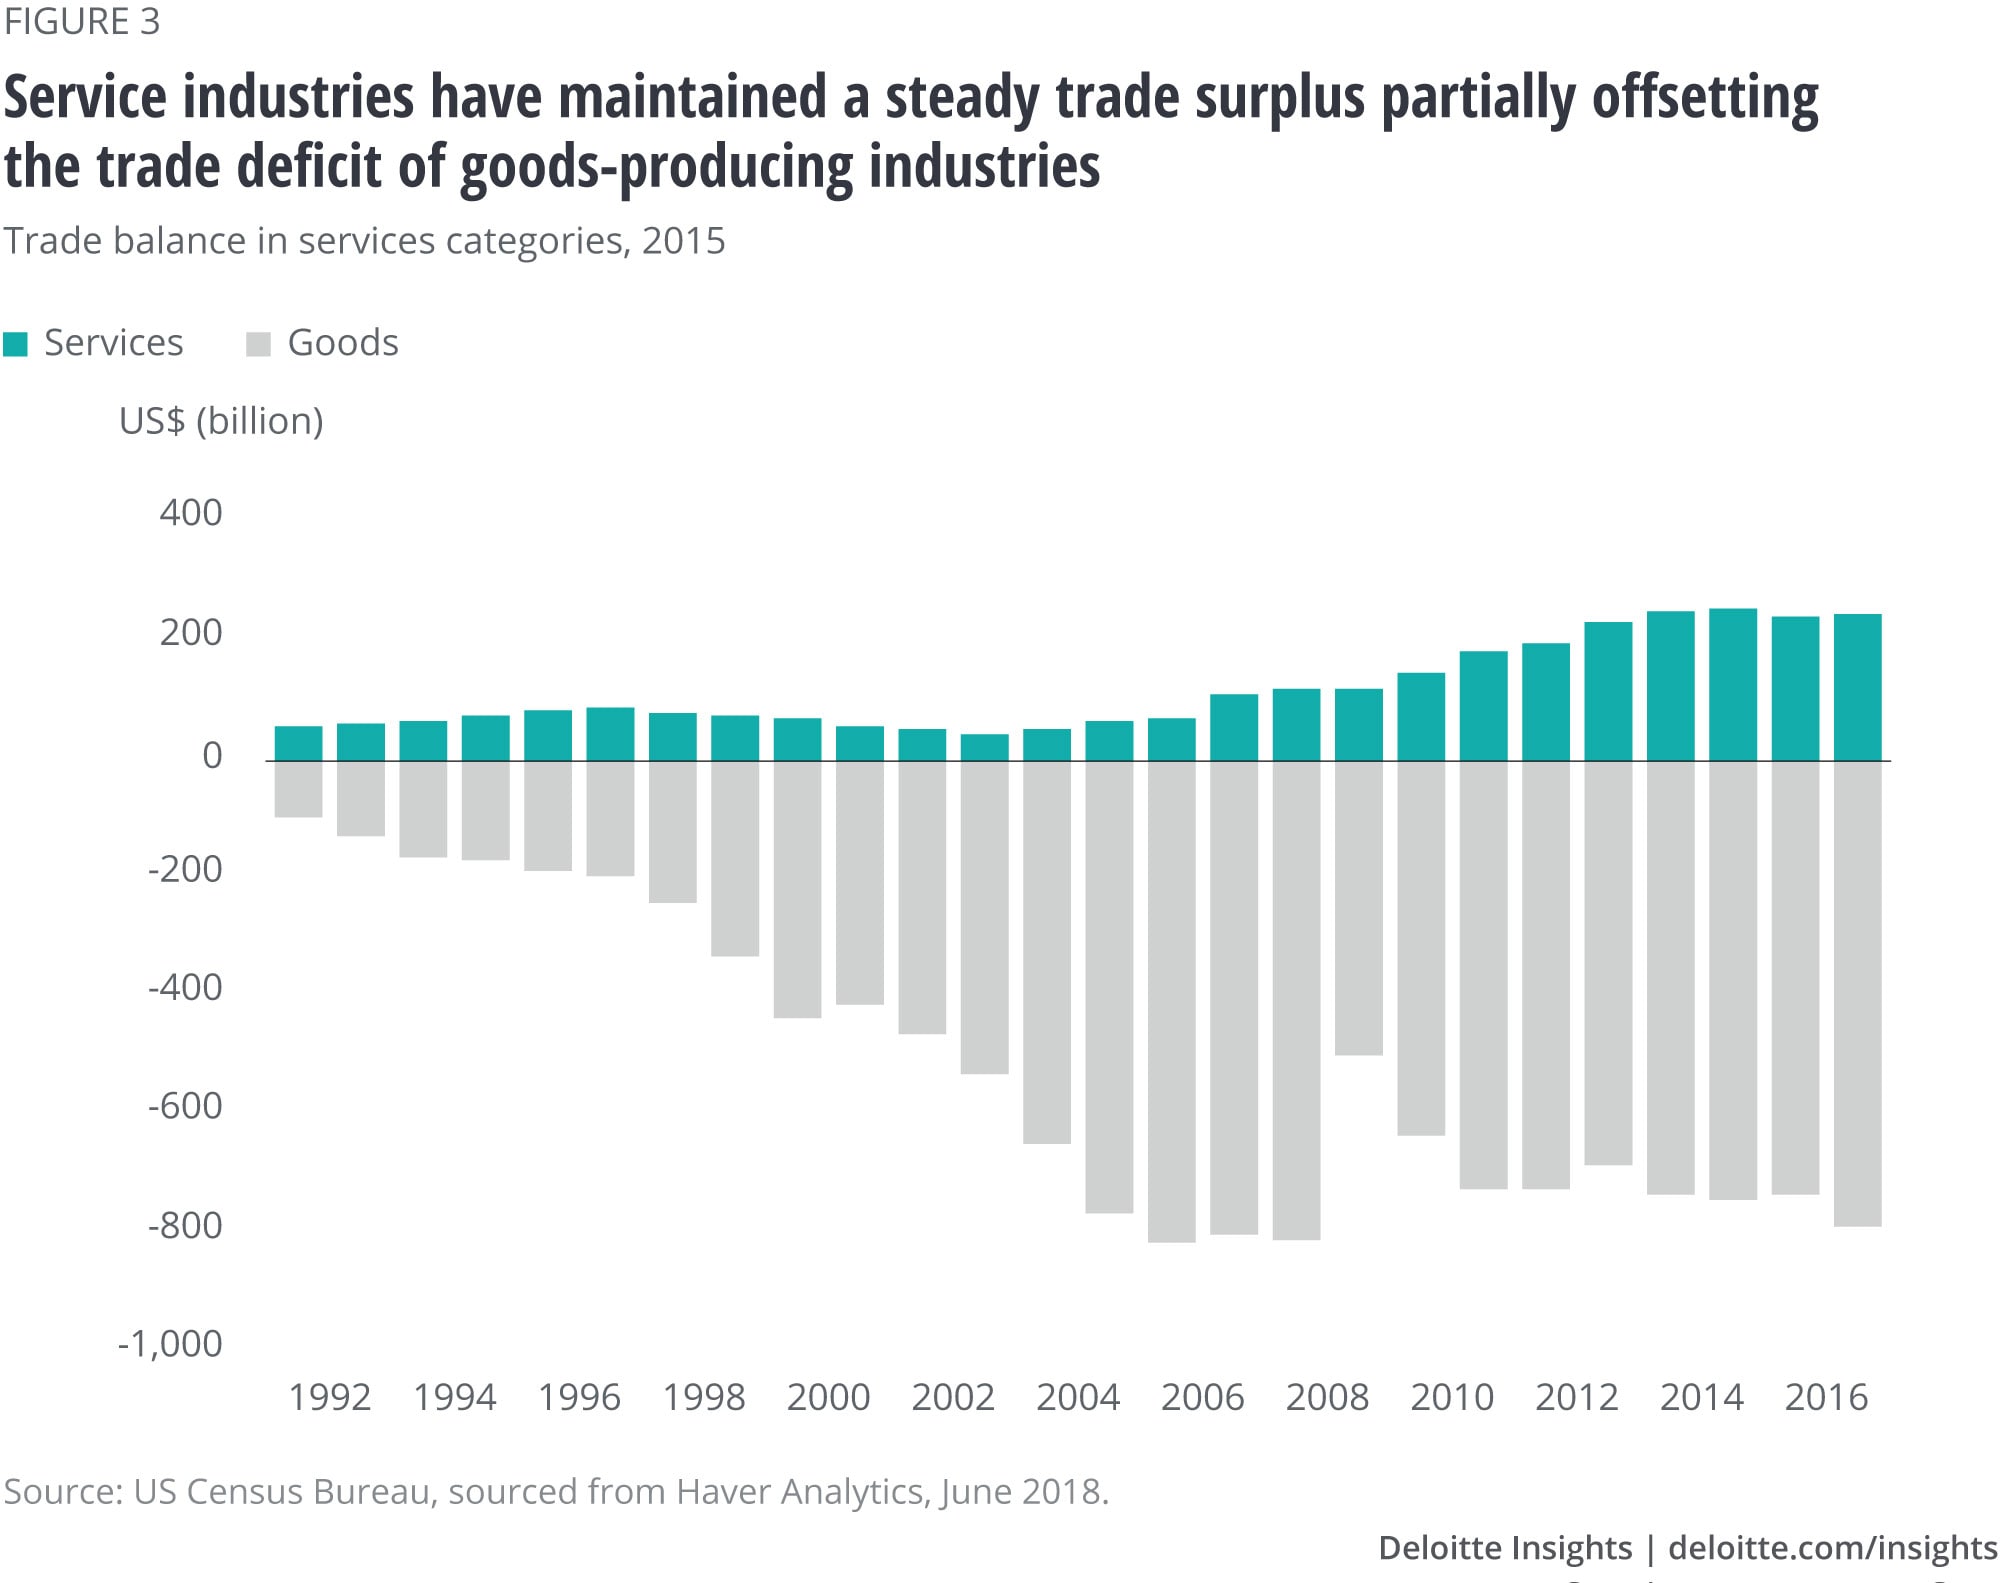 Service industries have maintained a steady trade surplus partially offsetting the trade deficit of goods-producing industries